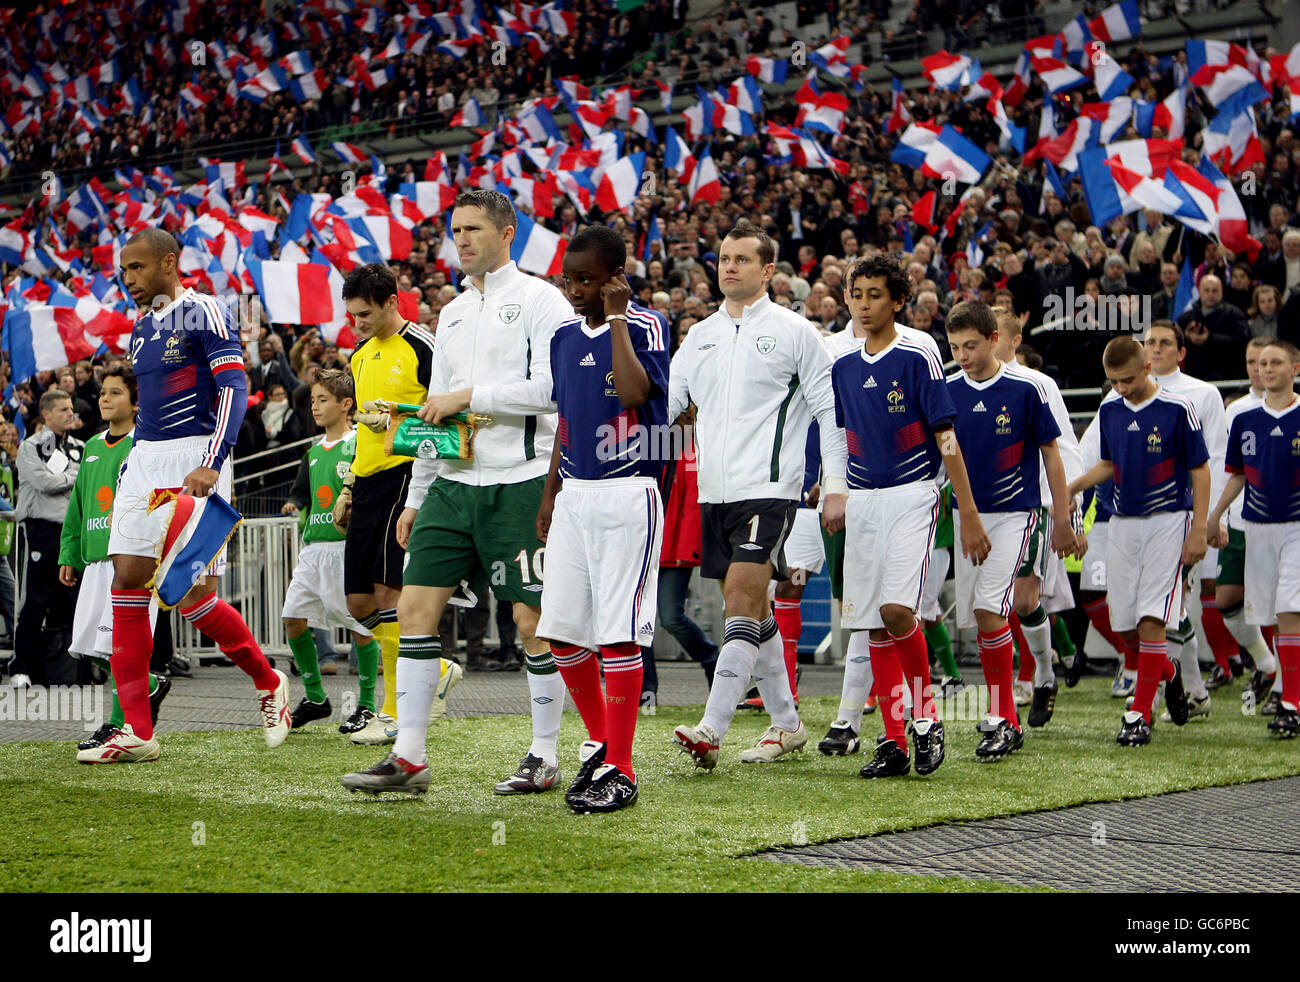 Soccer - FIFA World Cup 2010 - Play Offs - Second Leg - France v Republic of Ireland - Stade de France. France's Thierry Henry (left) and Republic of Ireland's Robbie Keane (centre) lead their teams out onto the pitch prior to kick off Stock Photo